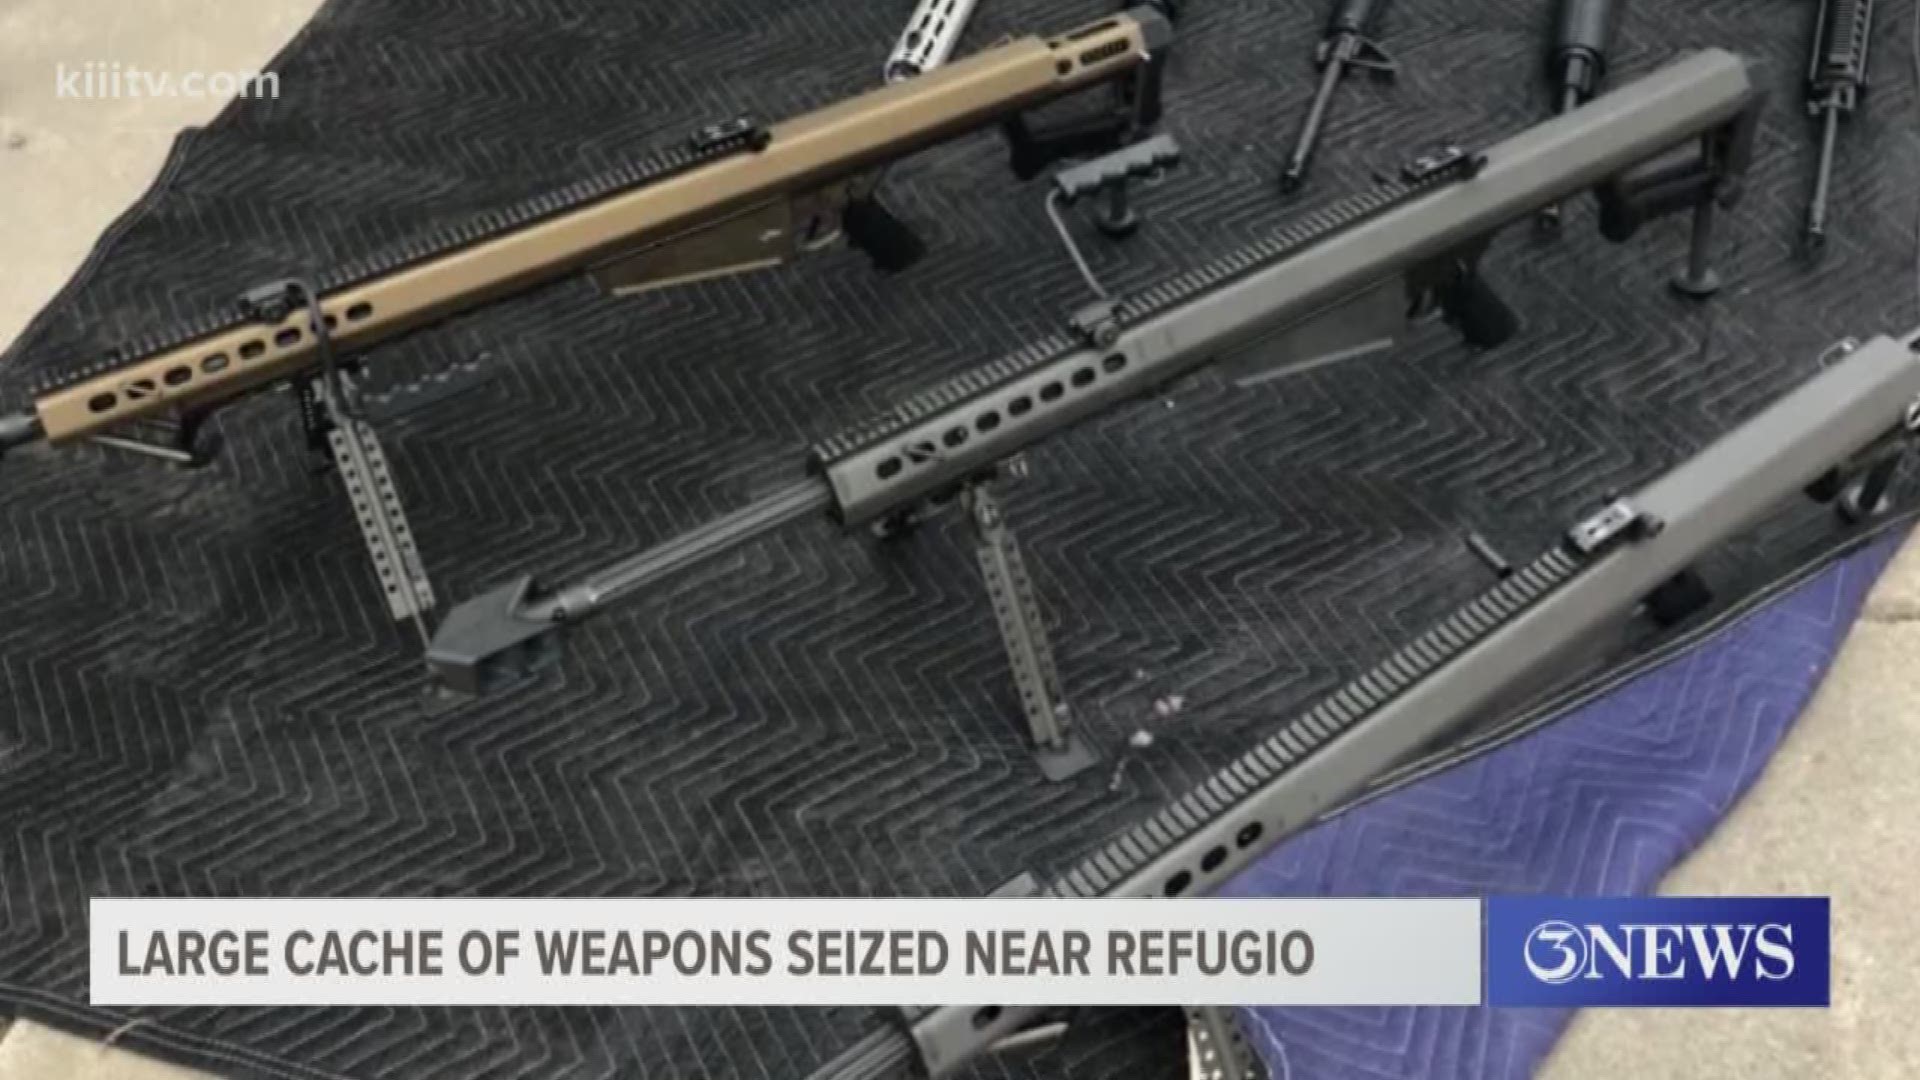 A traffic stop near Refugio has intercepted a large cache of weapons and ammo. Law enforcement believe the arsenal was on its way to Mexico.